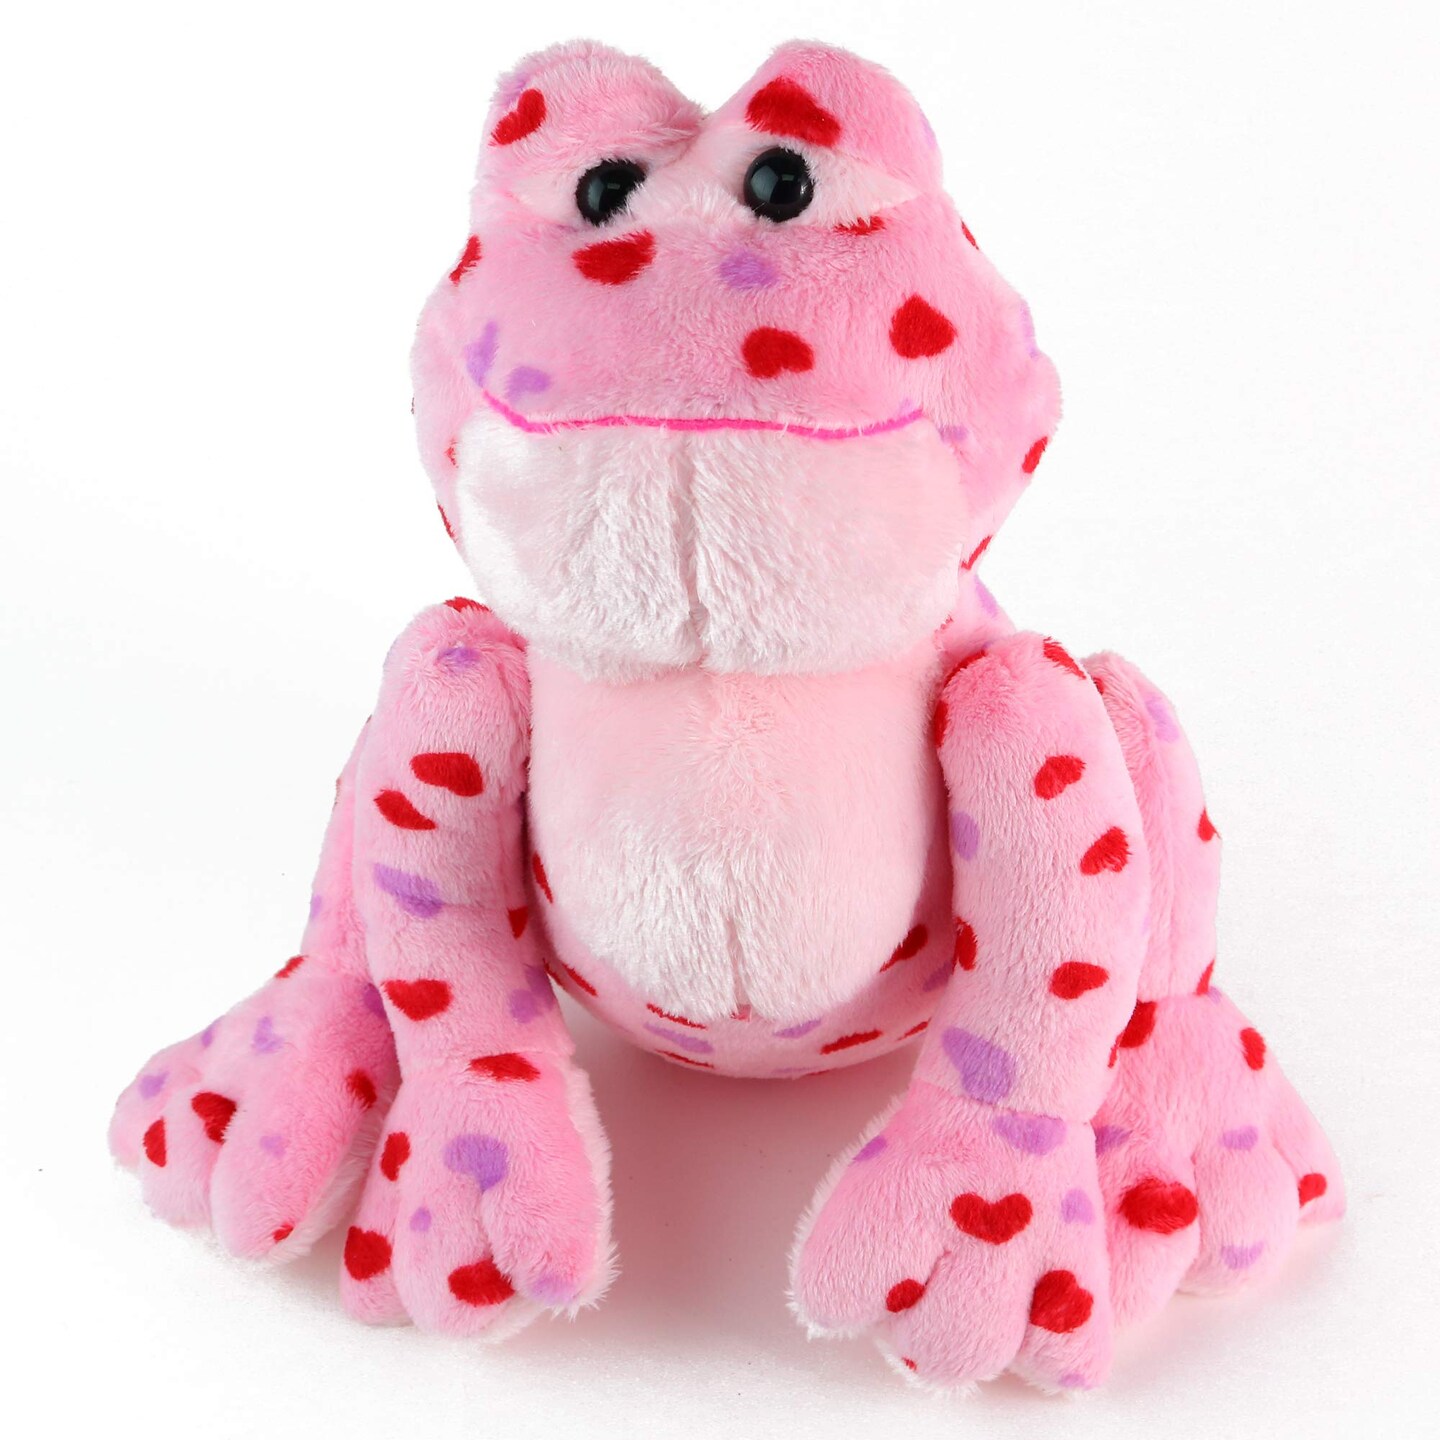 Big Mo's Toys Love Frog - Plush Valentine's Day Pink and Red Heart